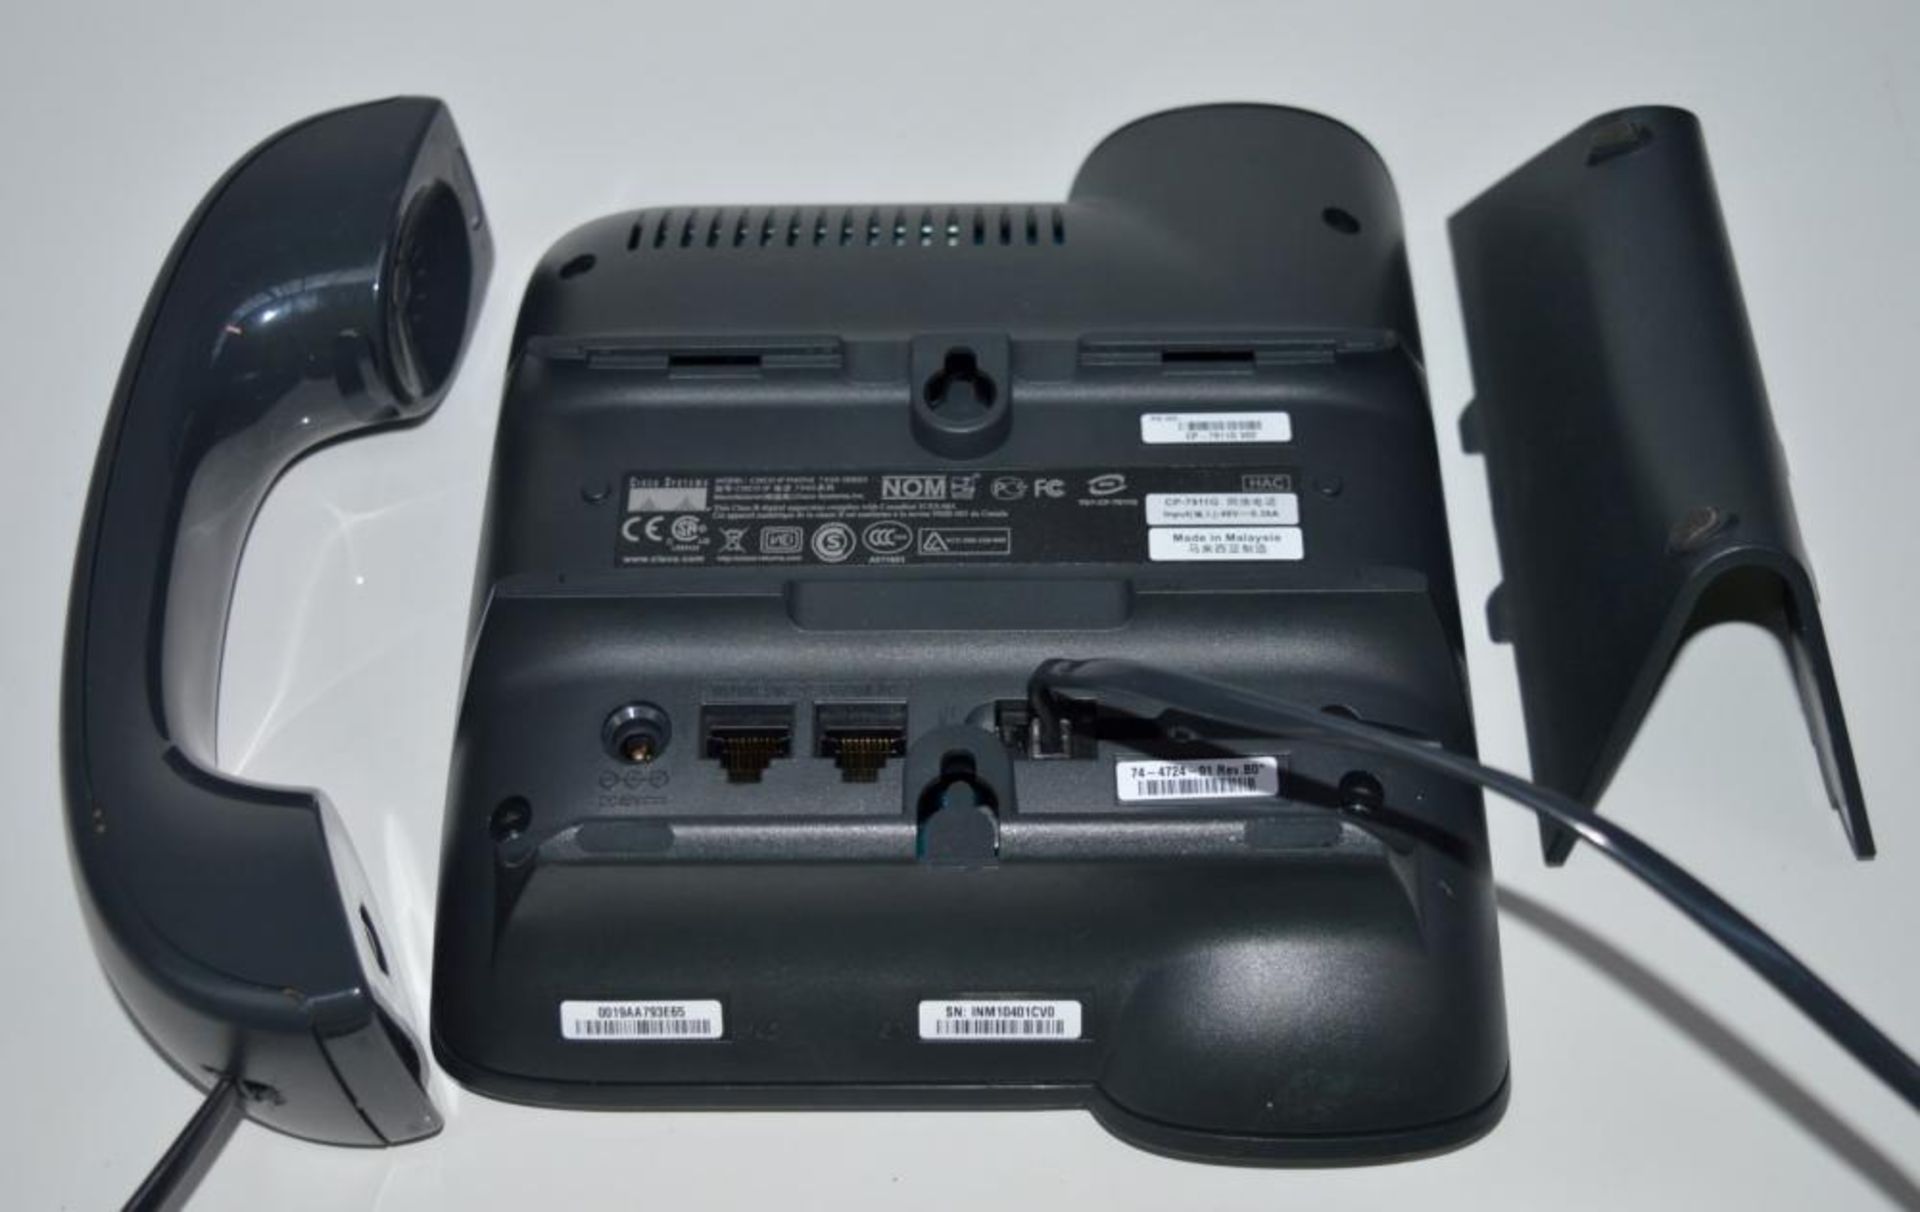 4 x Cisco CP-7911G Unified IP SIP Phones - Removed From a Working Office Environment in Good Conditi - Image 8 of 8